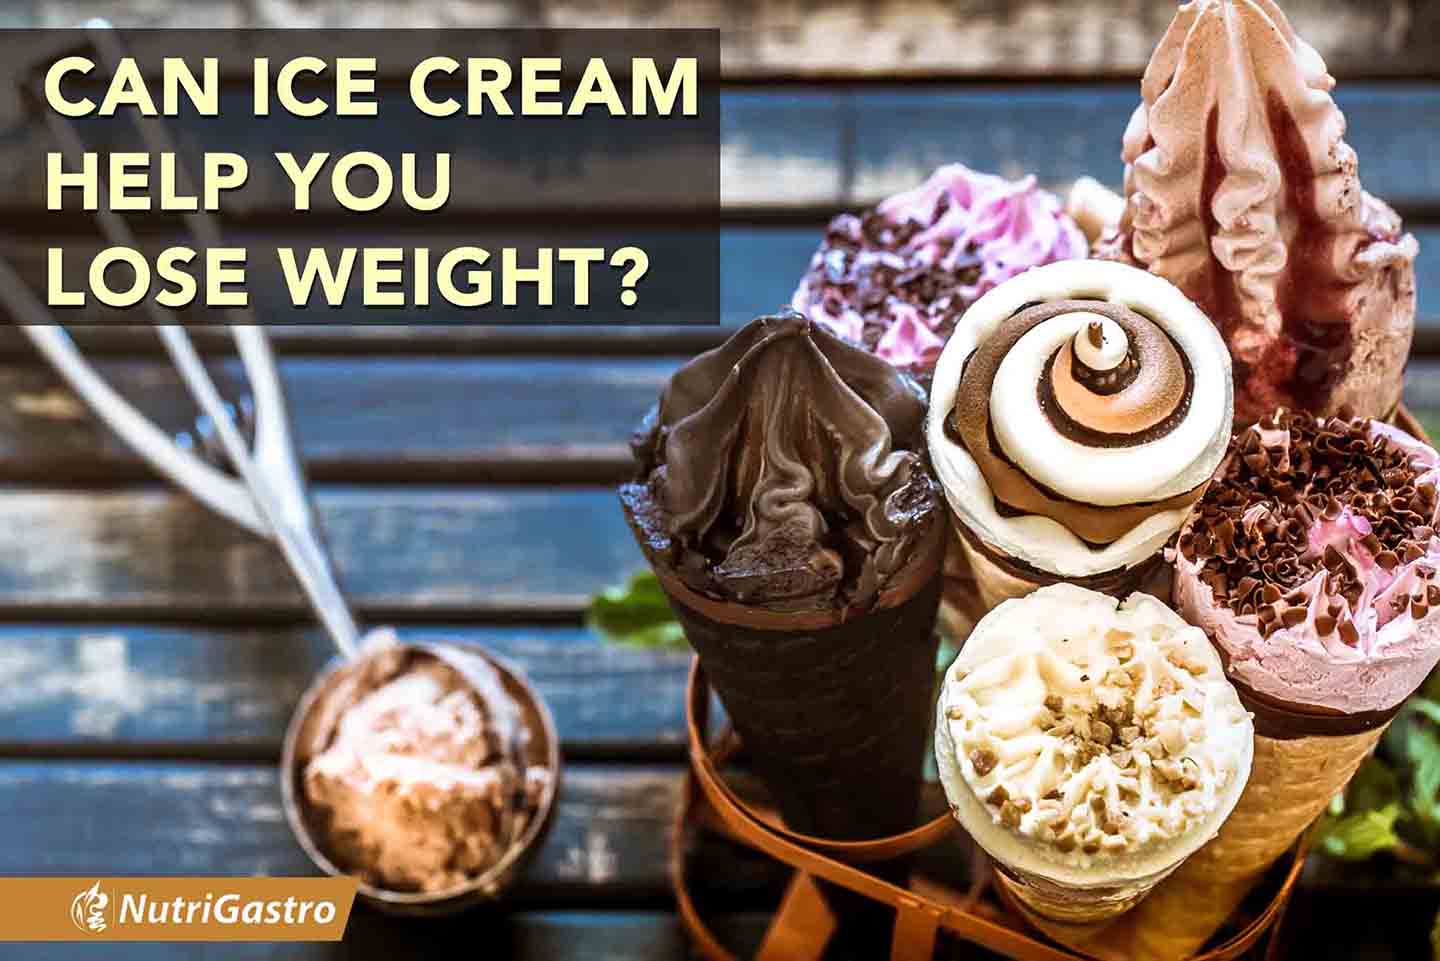 Can ice cream help you lose weight